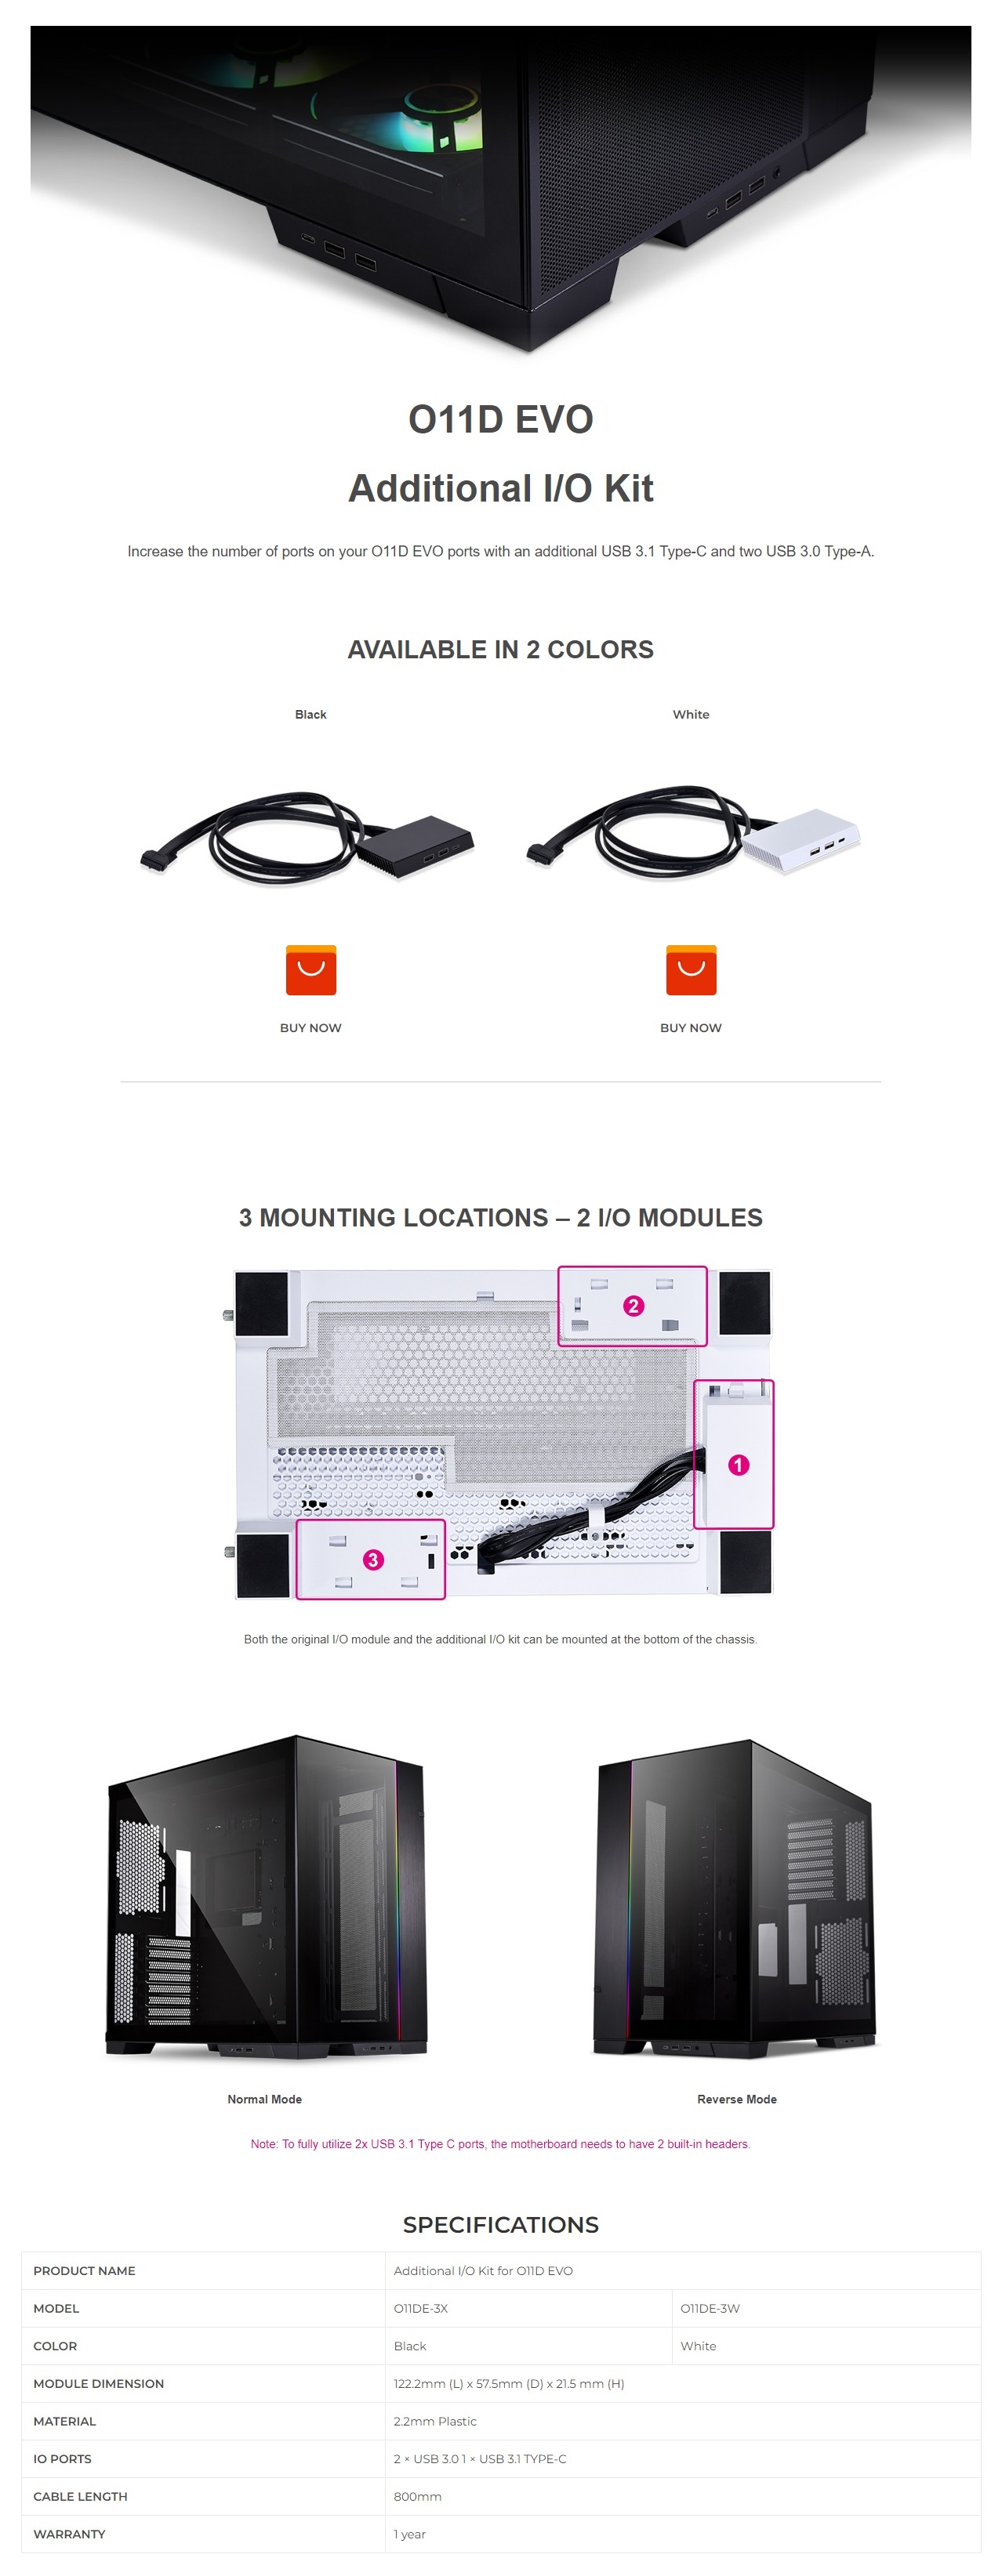 A large marketing image providing additional information about the product Lian Li O11D EVO Additional Kit I/O Kit - White - Additional alt info not provided